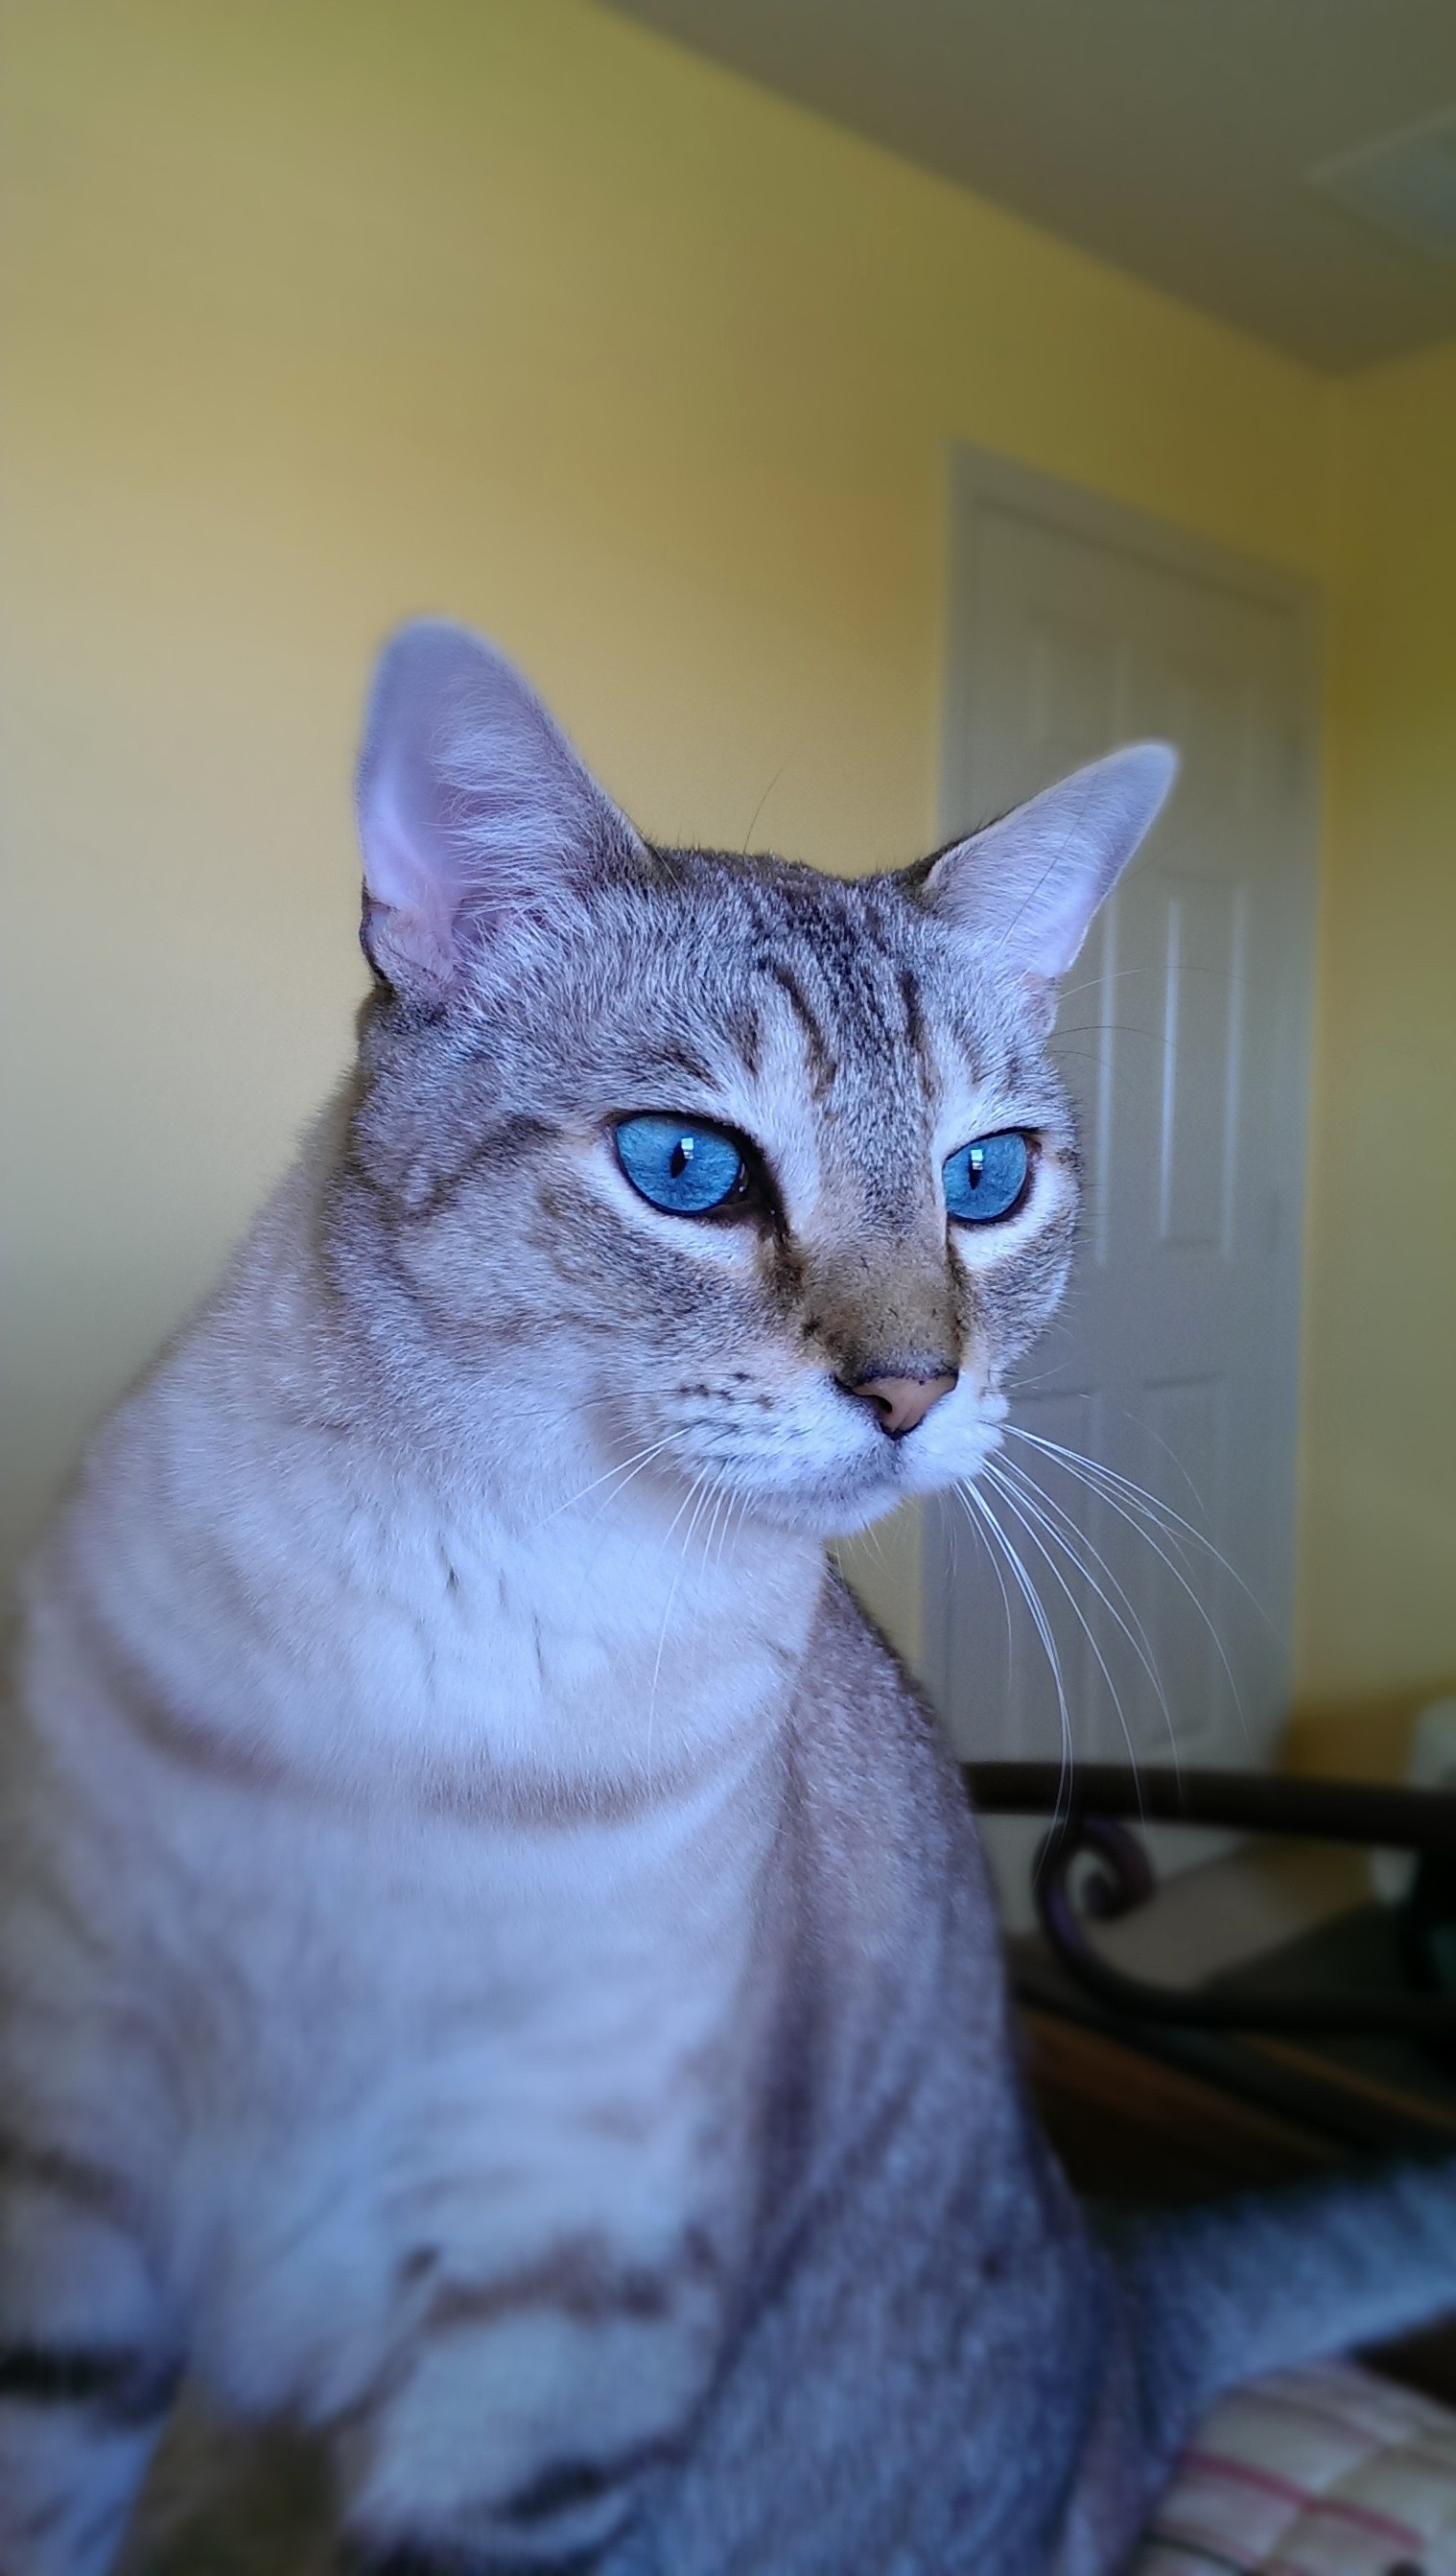 Rufus has such stunning blue eyes